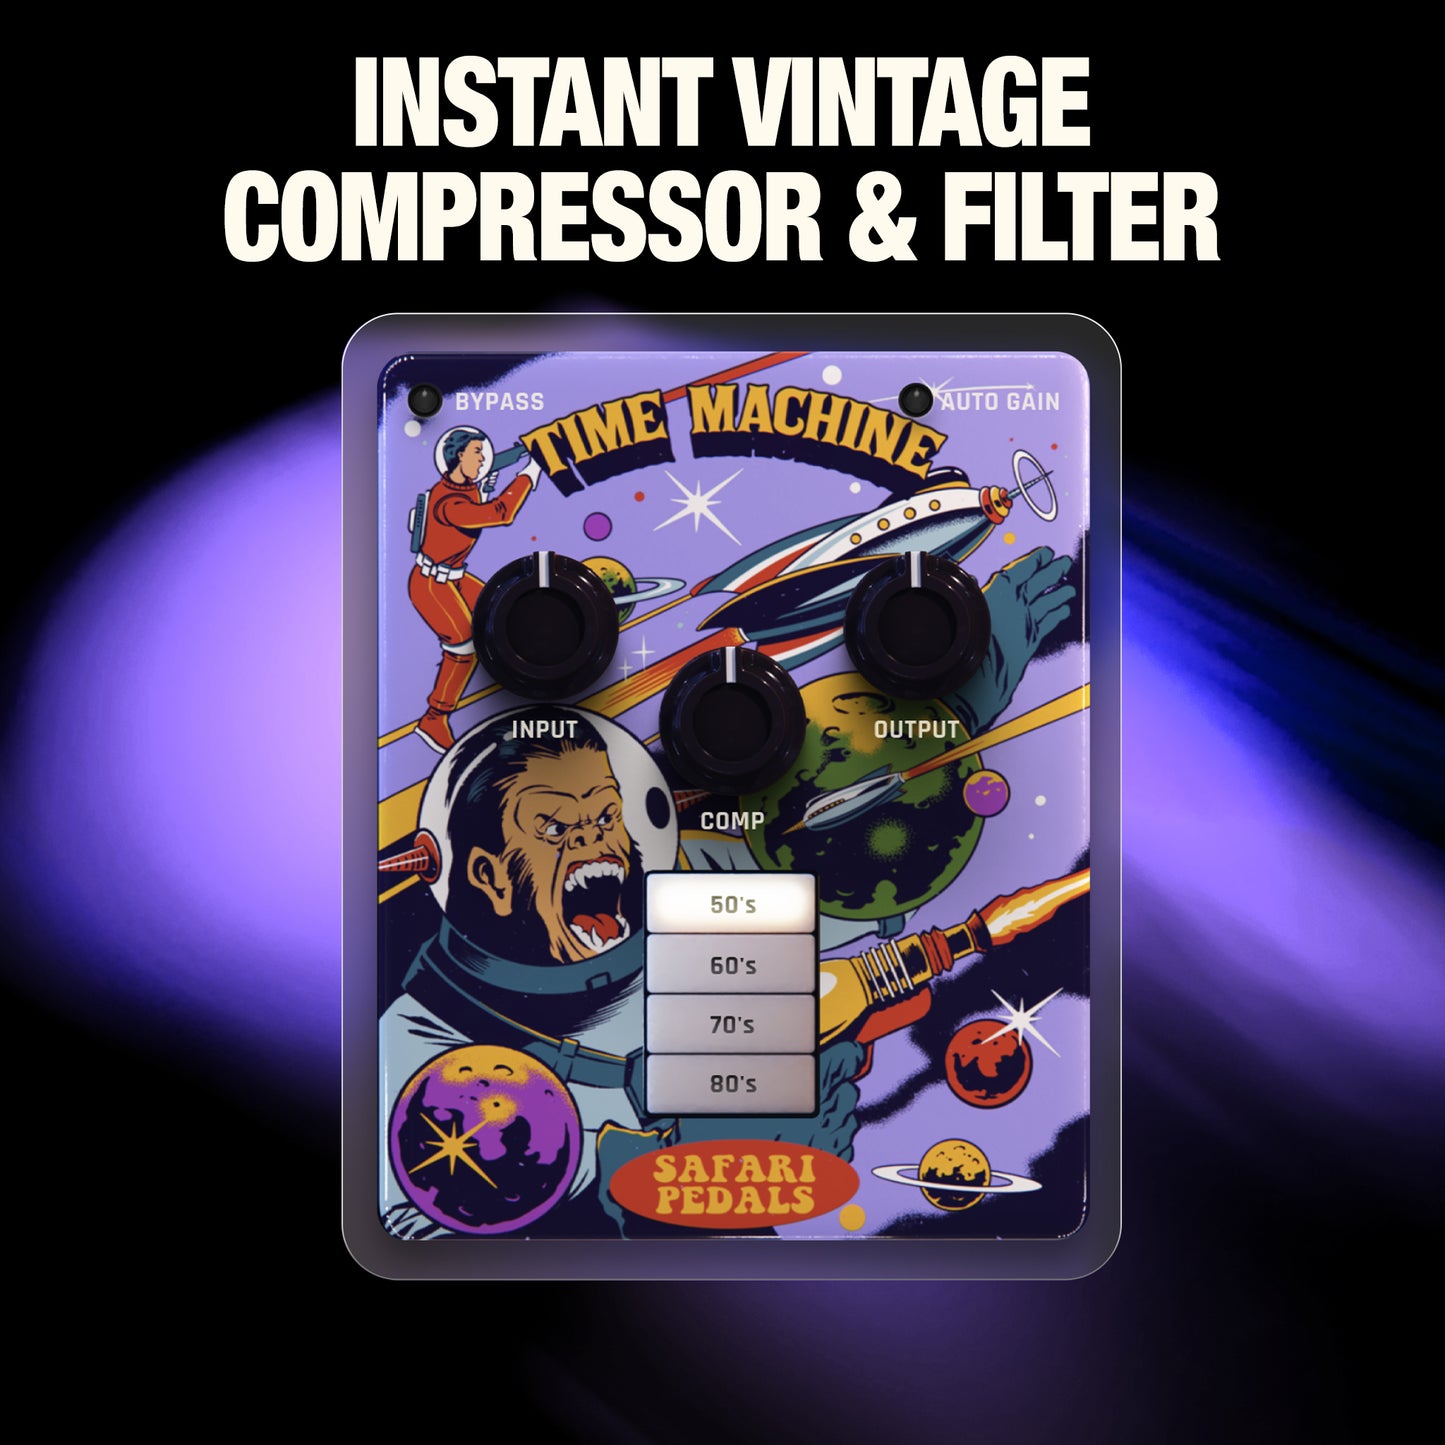 Time Machine - Instant vintage compressor and filters